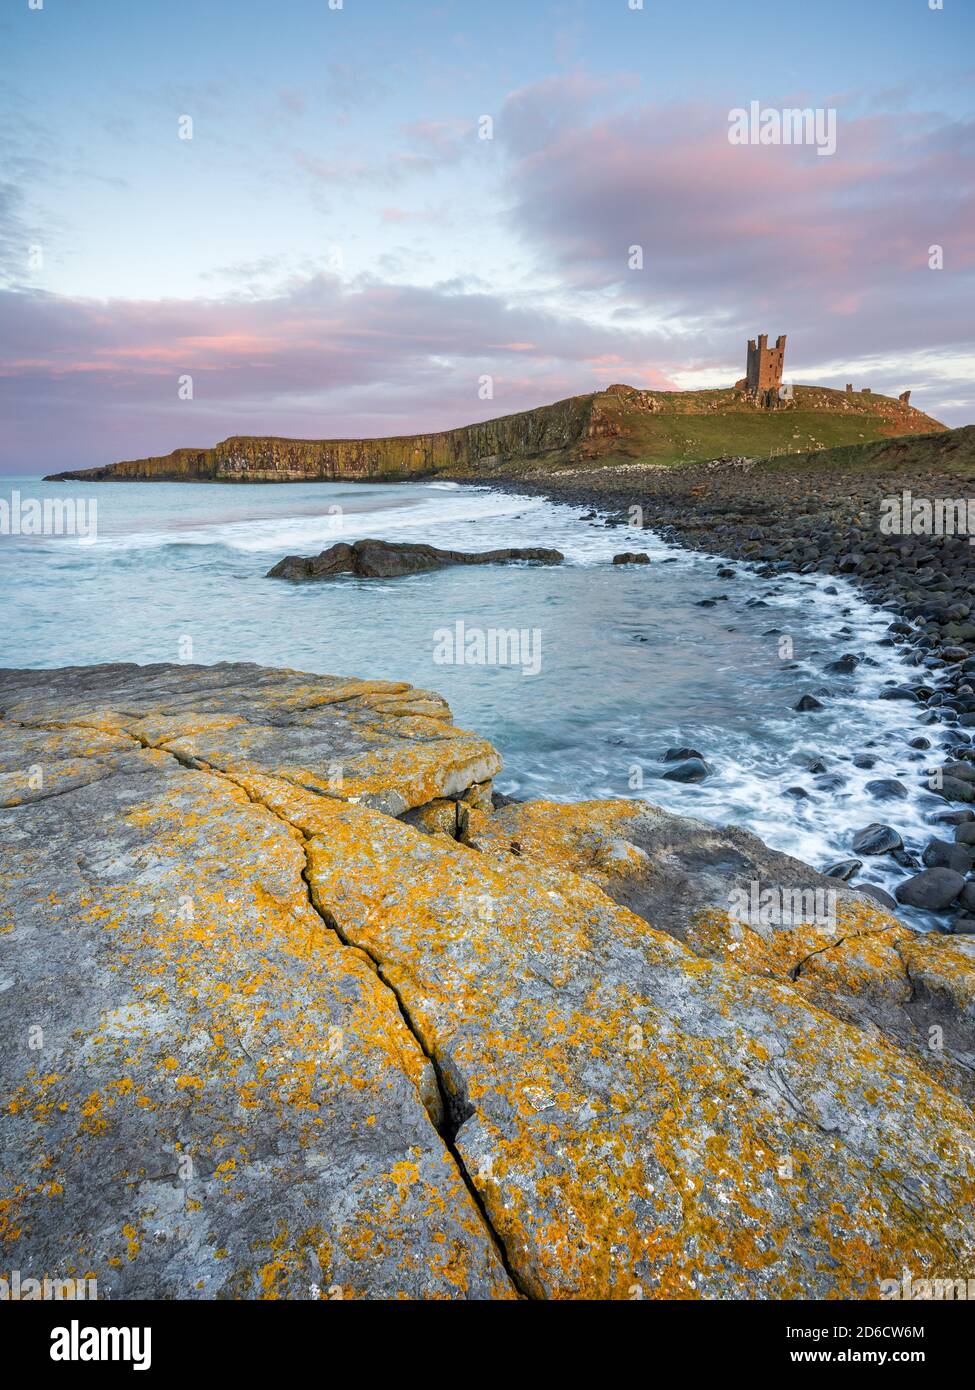 Dunstanburgh Castle glows in late evening light at sunset, with the weathered, lichen covered rocks of Embleton Bay visible in the foreground. Stock Photo